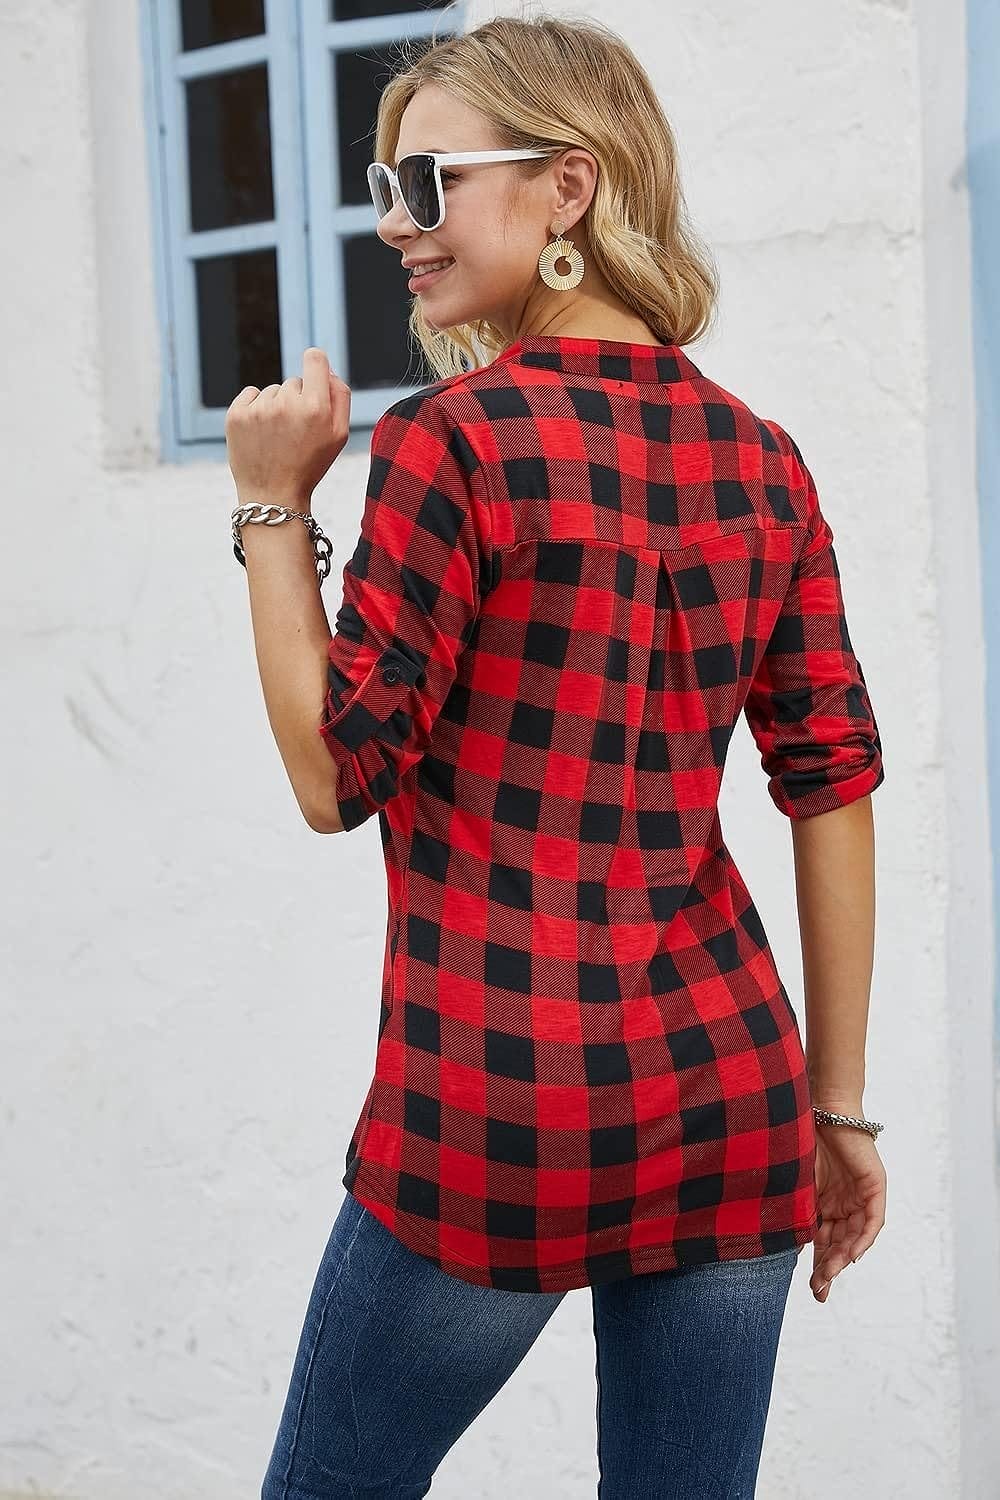 You are currently viewing Ninedaily Women’s Plaid Shirt Review